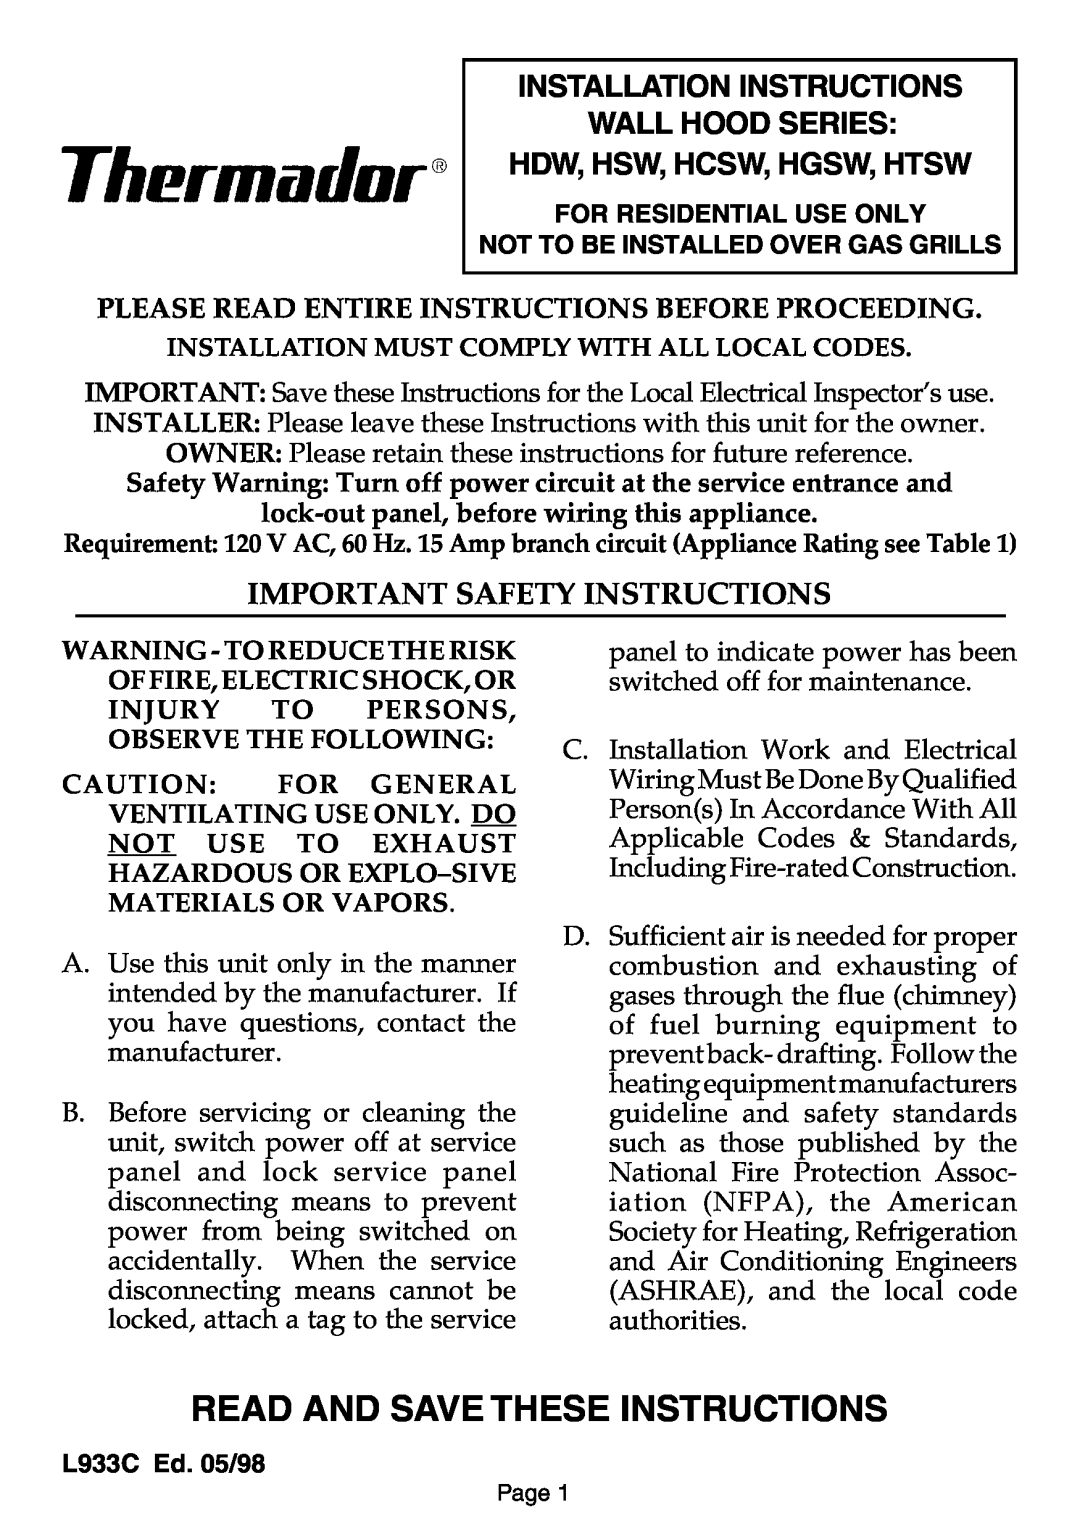 Thermador HCSW, HSW Installation Instructions Wall Hood Series Hdw, Hsw, Hcsw, Hgsw, Htsw, Important Safety Instructions 